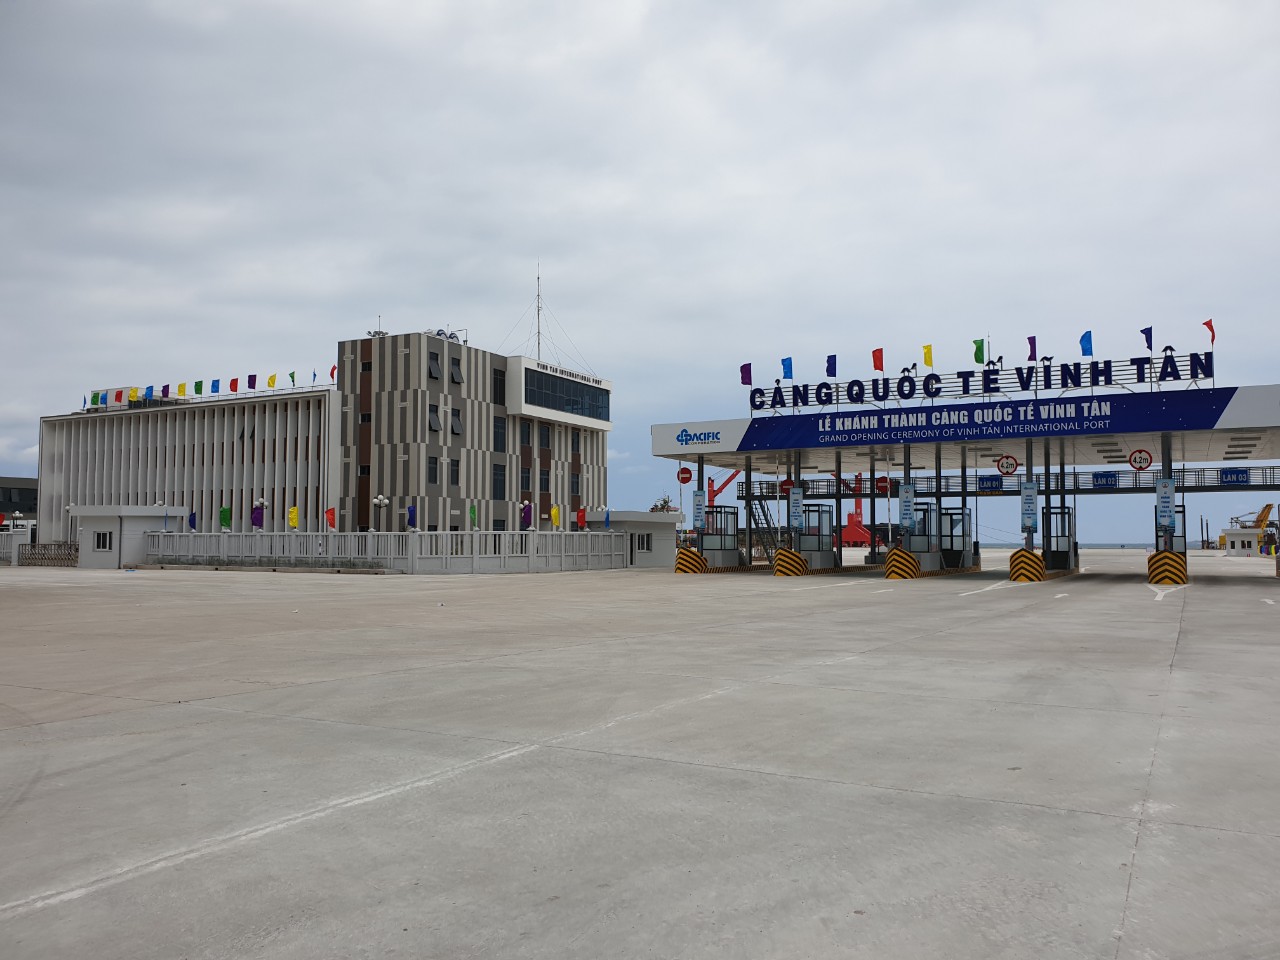 VINH TAN SEAPORT – A “BREATH” OF INTERNATIONALIZATION BROUGHT INTO THE DESIGN